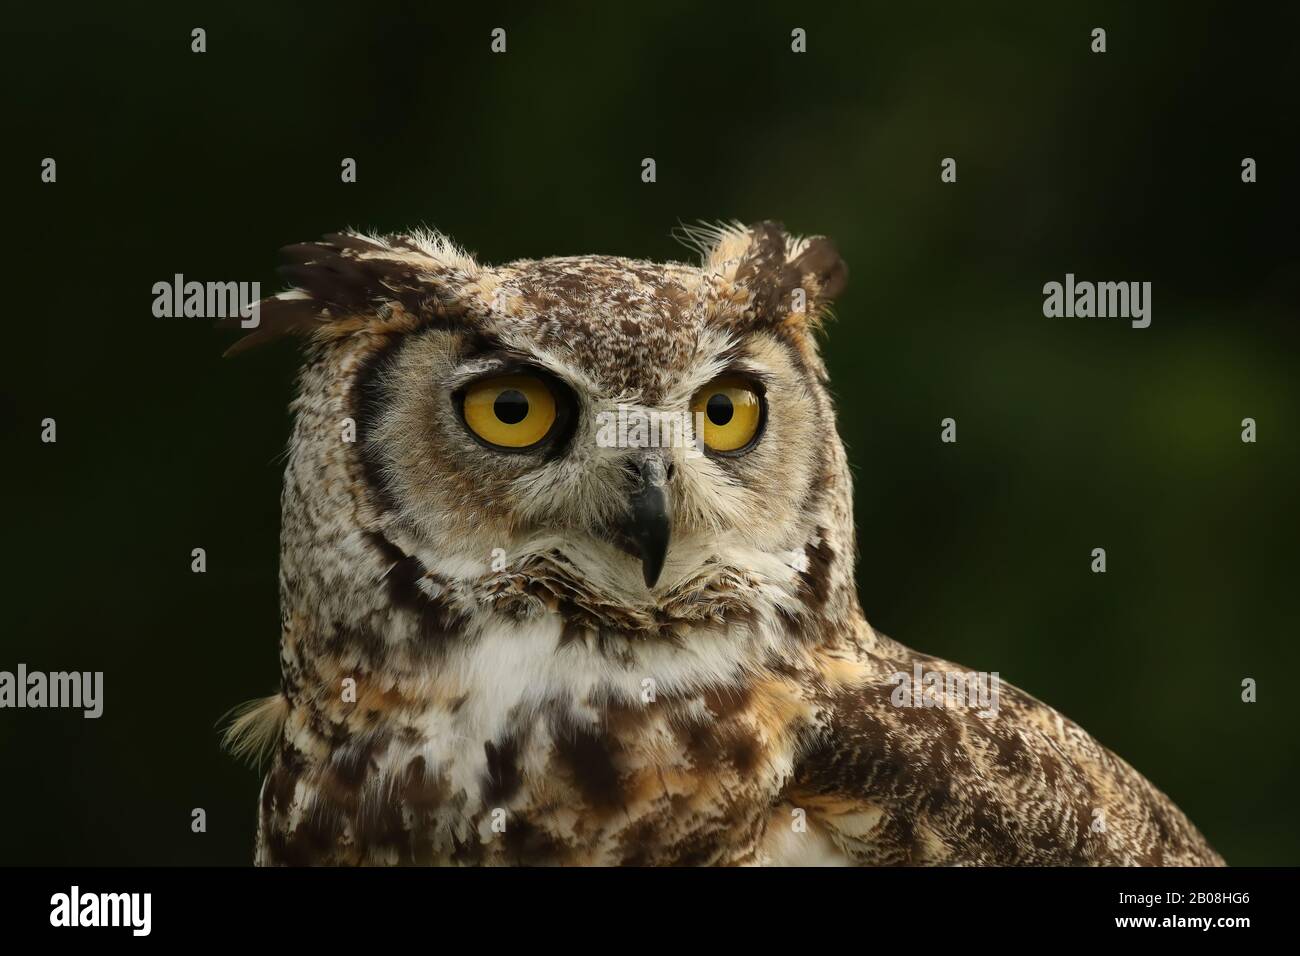 great horned owl close up Stock Photo